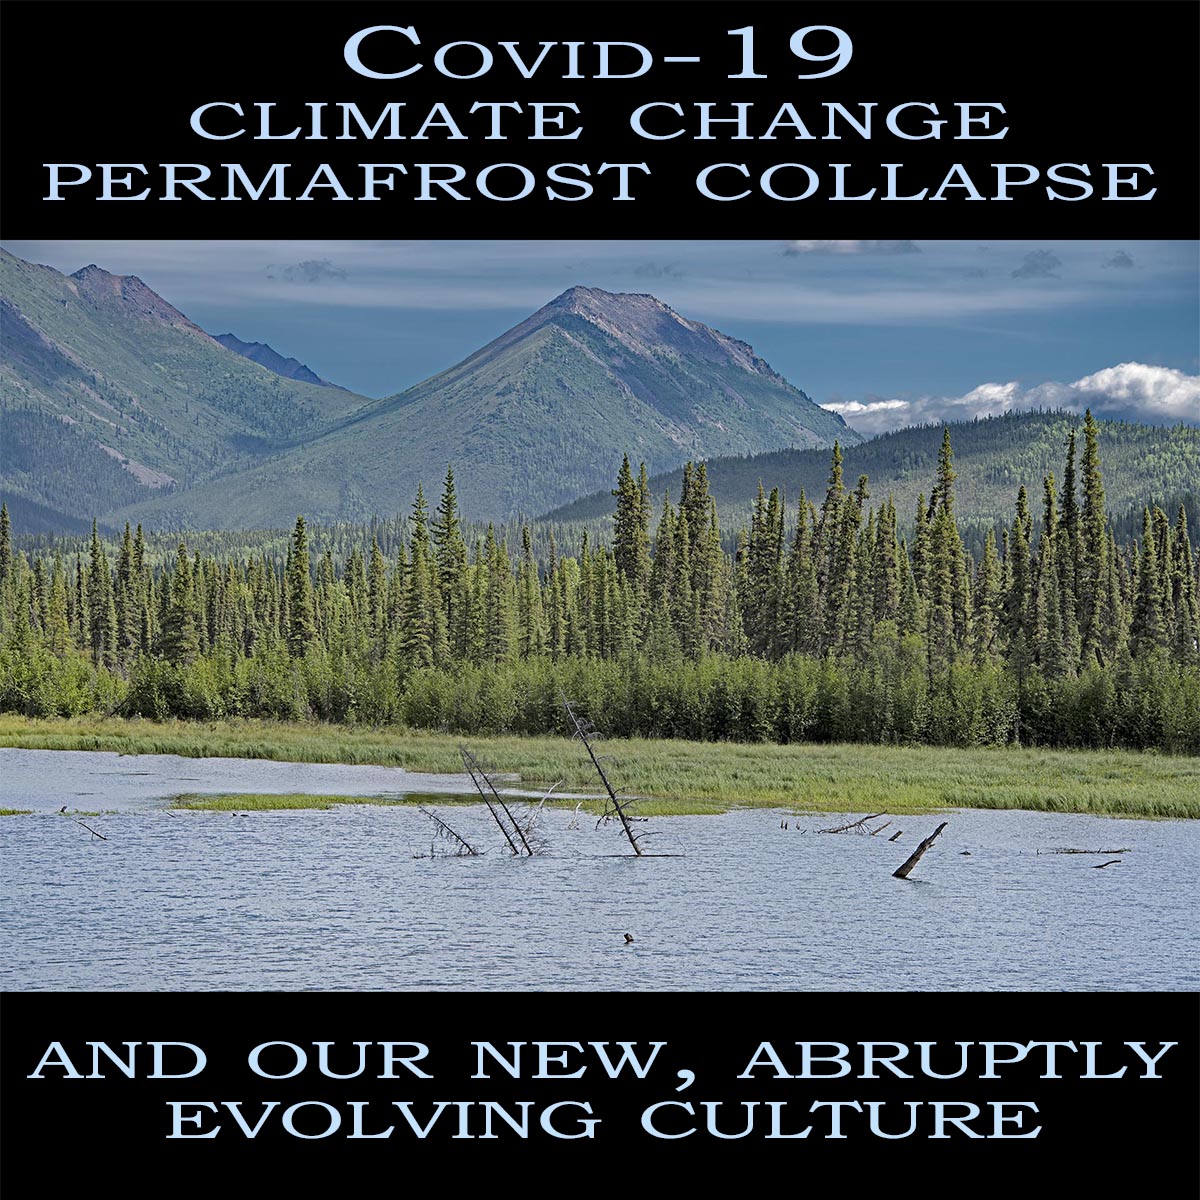 Covid-19, climate change, and permafrost collapse, and our new, abruptly evolving culture.